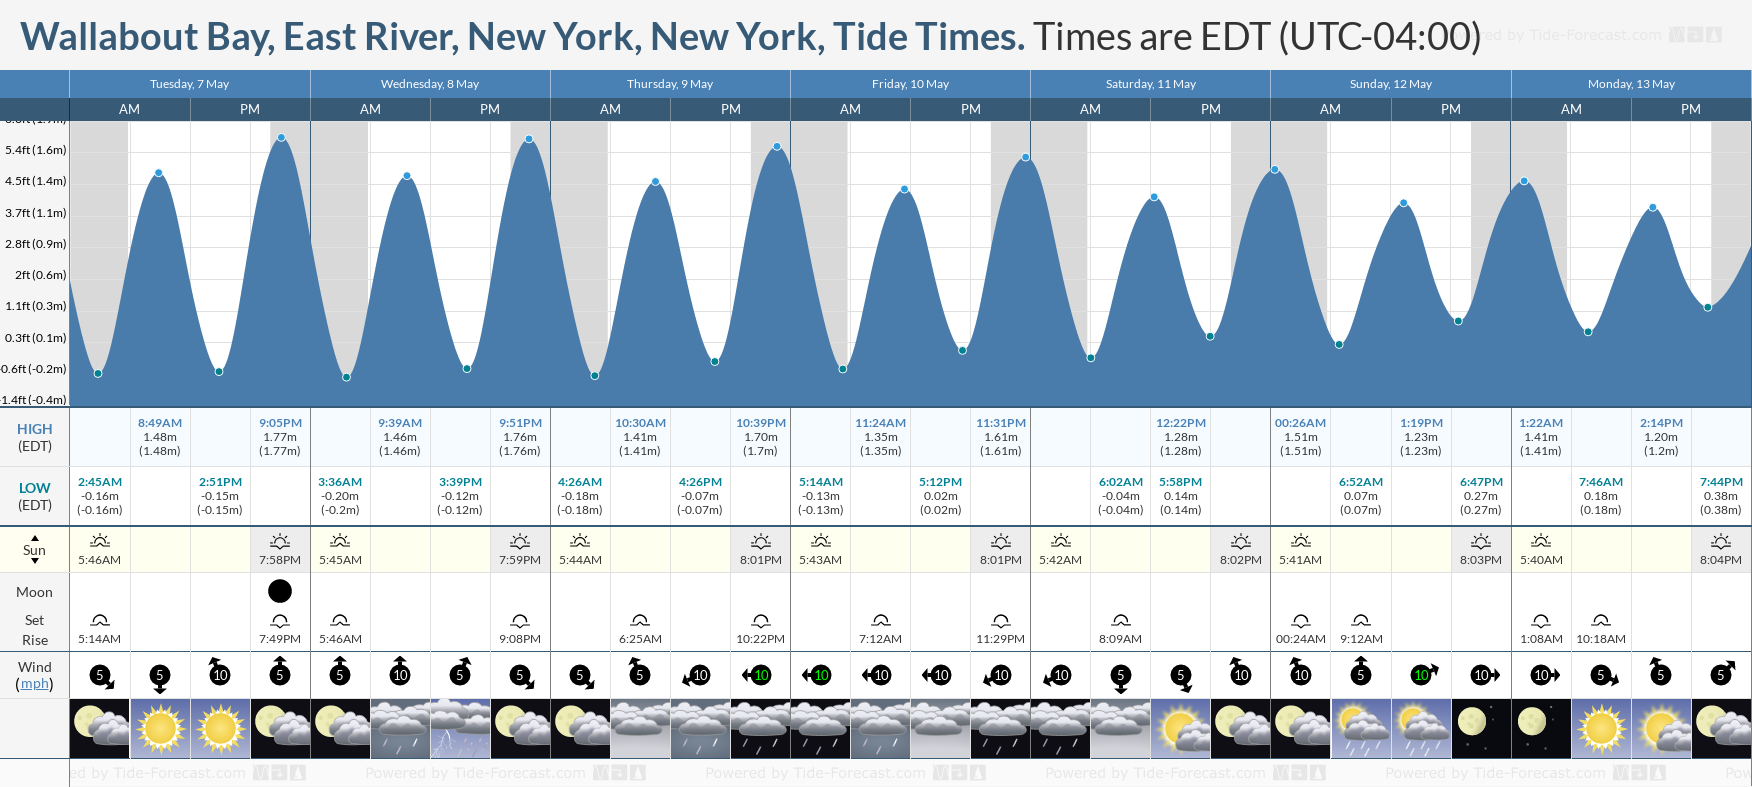 Wallabout Bay, East River, New York, New York Tide Chart including high and low tide times for the next 7 days